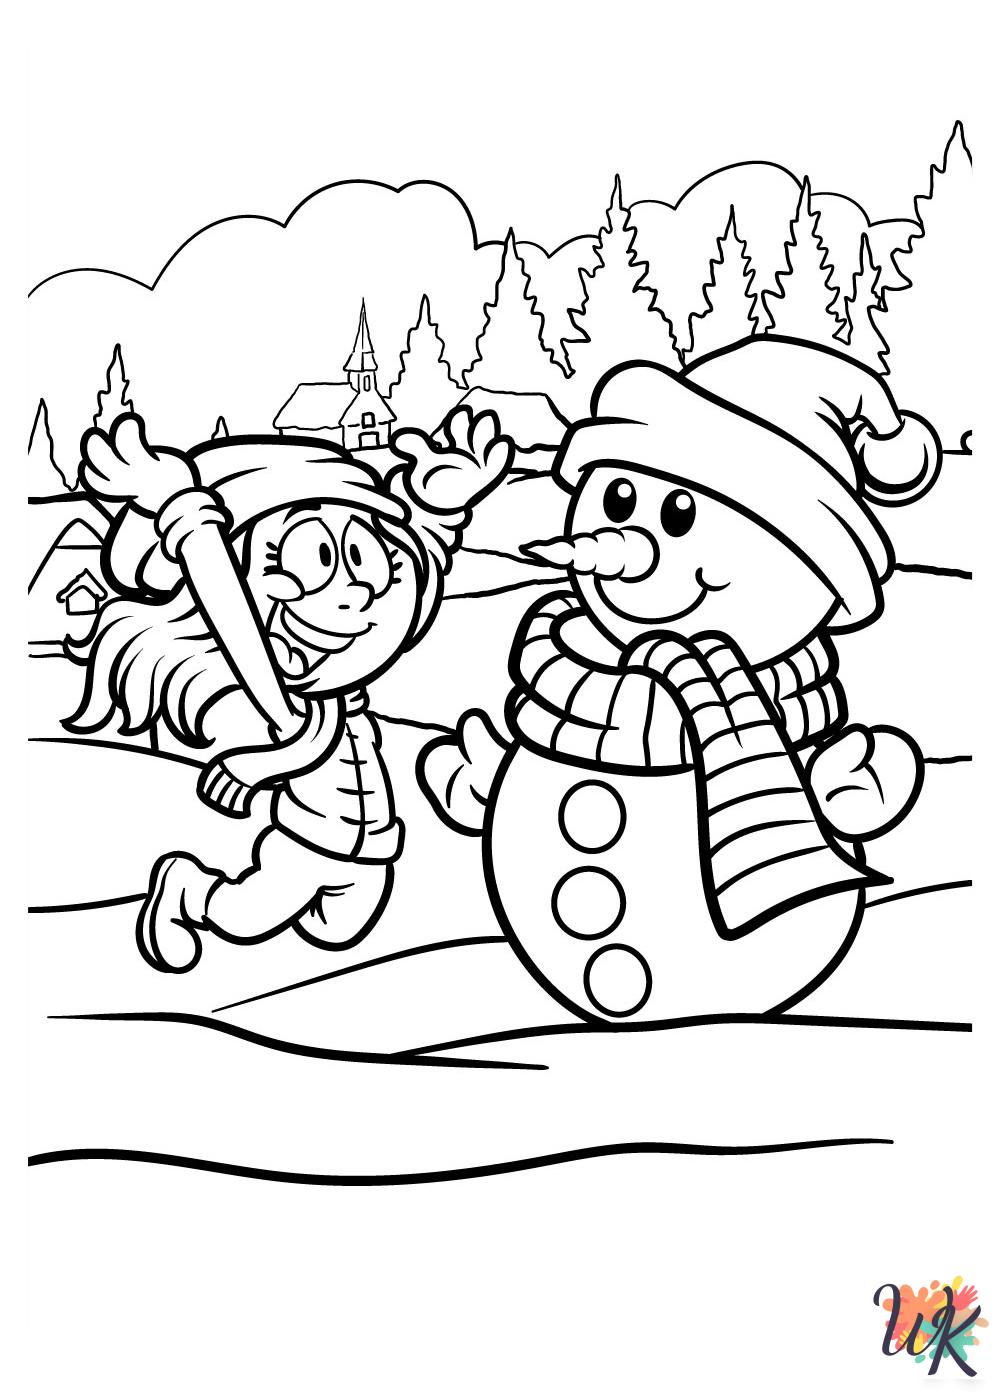 Snowman cards coloring pages